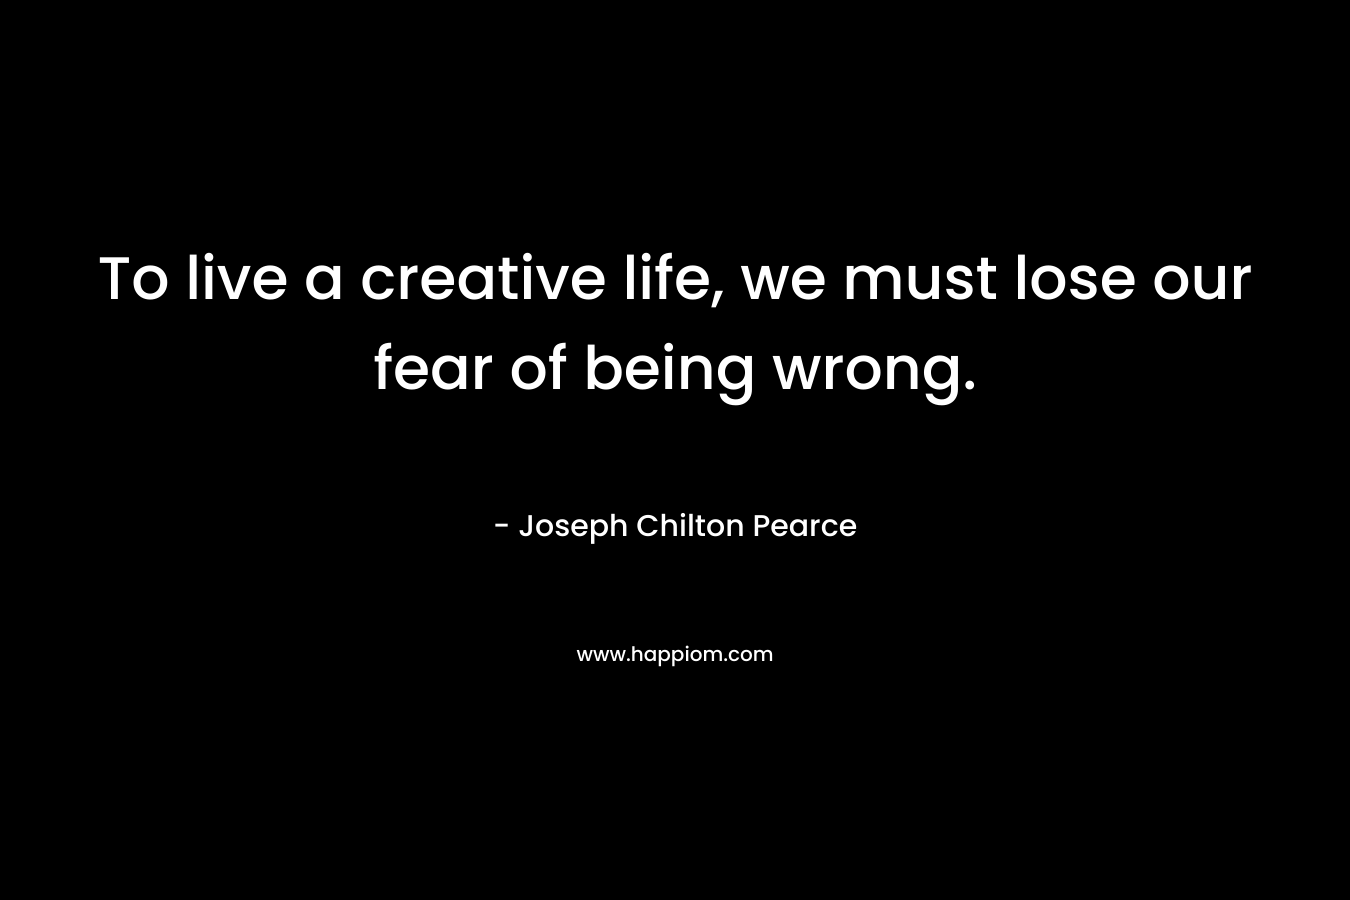 To live a creative life, we must lose our fear of being wrong. – Joseph Chilton Pearce